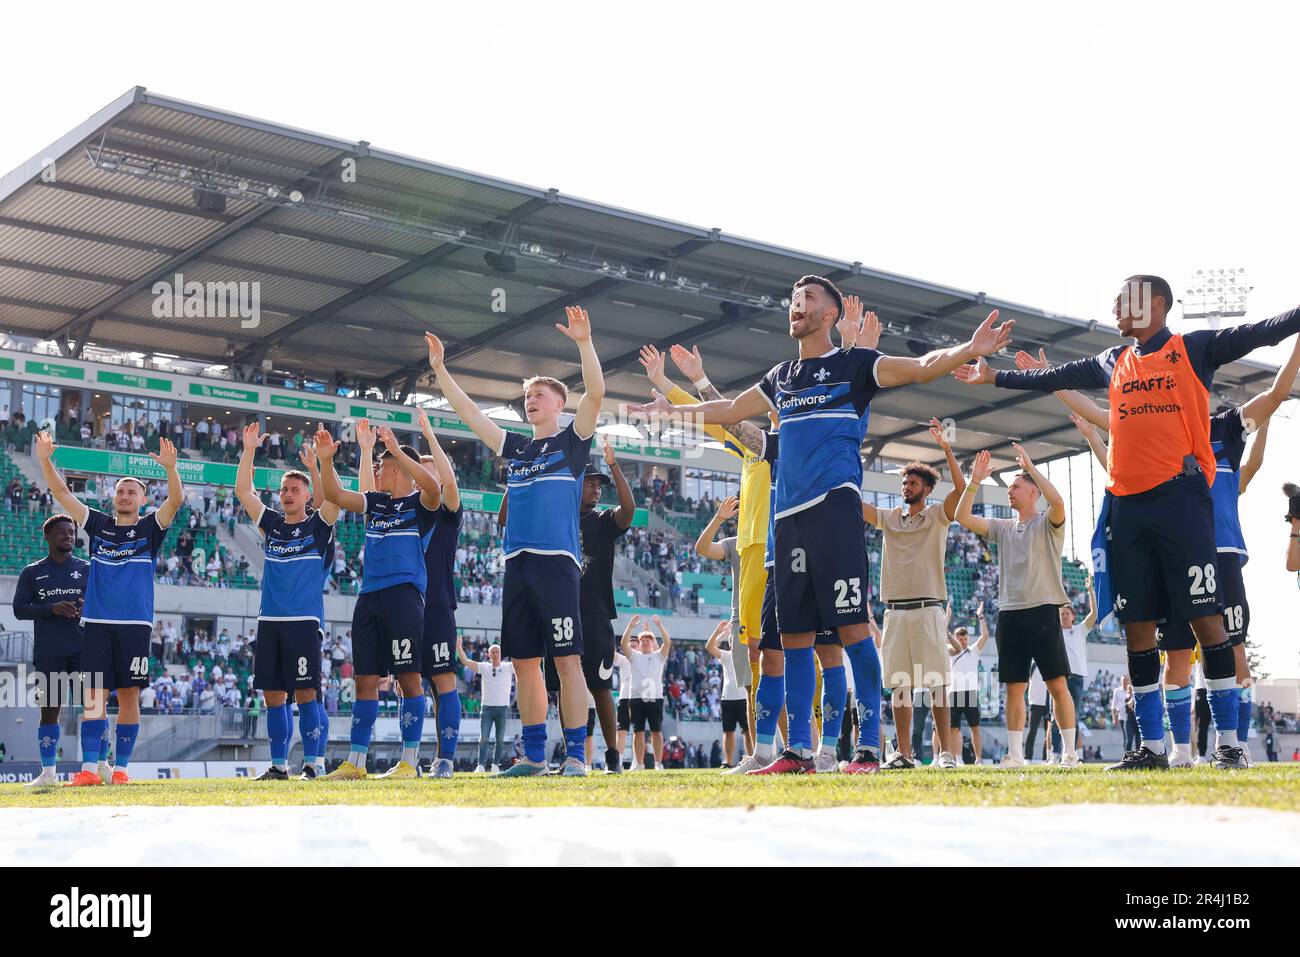 28 May 2023, Bavaria, Fürth: Soccer: 2. Bundesliga, SpVgg Greuther Fürth - Darmstadt 98, Matchday 34, Sportpark Ronhof Thomas Sommer. Darmstadt's Filip Stojilkovic (l-r), Fabian Schnellhardt, Fabio Torsiello, Clemens Riedel, Klaus Gjasula and Yassin Ben Balla cheer on their fans. Photo: Daniel Löb/dpa - IMPORTANT NOTE: In accordance with the requirements of the DFL Deutsche Fußball Liga and the DFB Deutscher Fußball-Bund, it is prohibited to use or have used photographs taken in the stadium and/or of the match in the form of sequence pictures and/or video-like photo series. Stock Photo